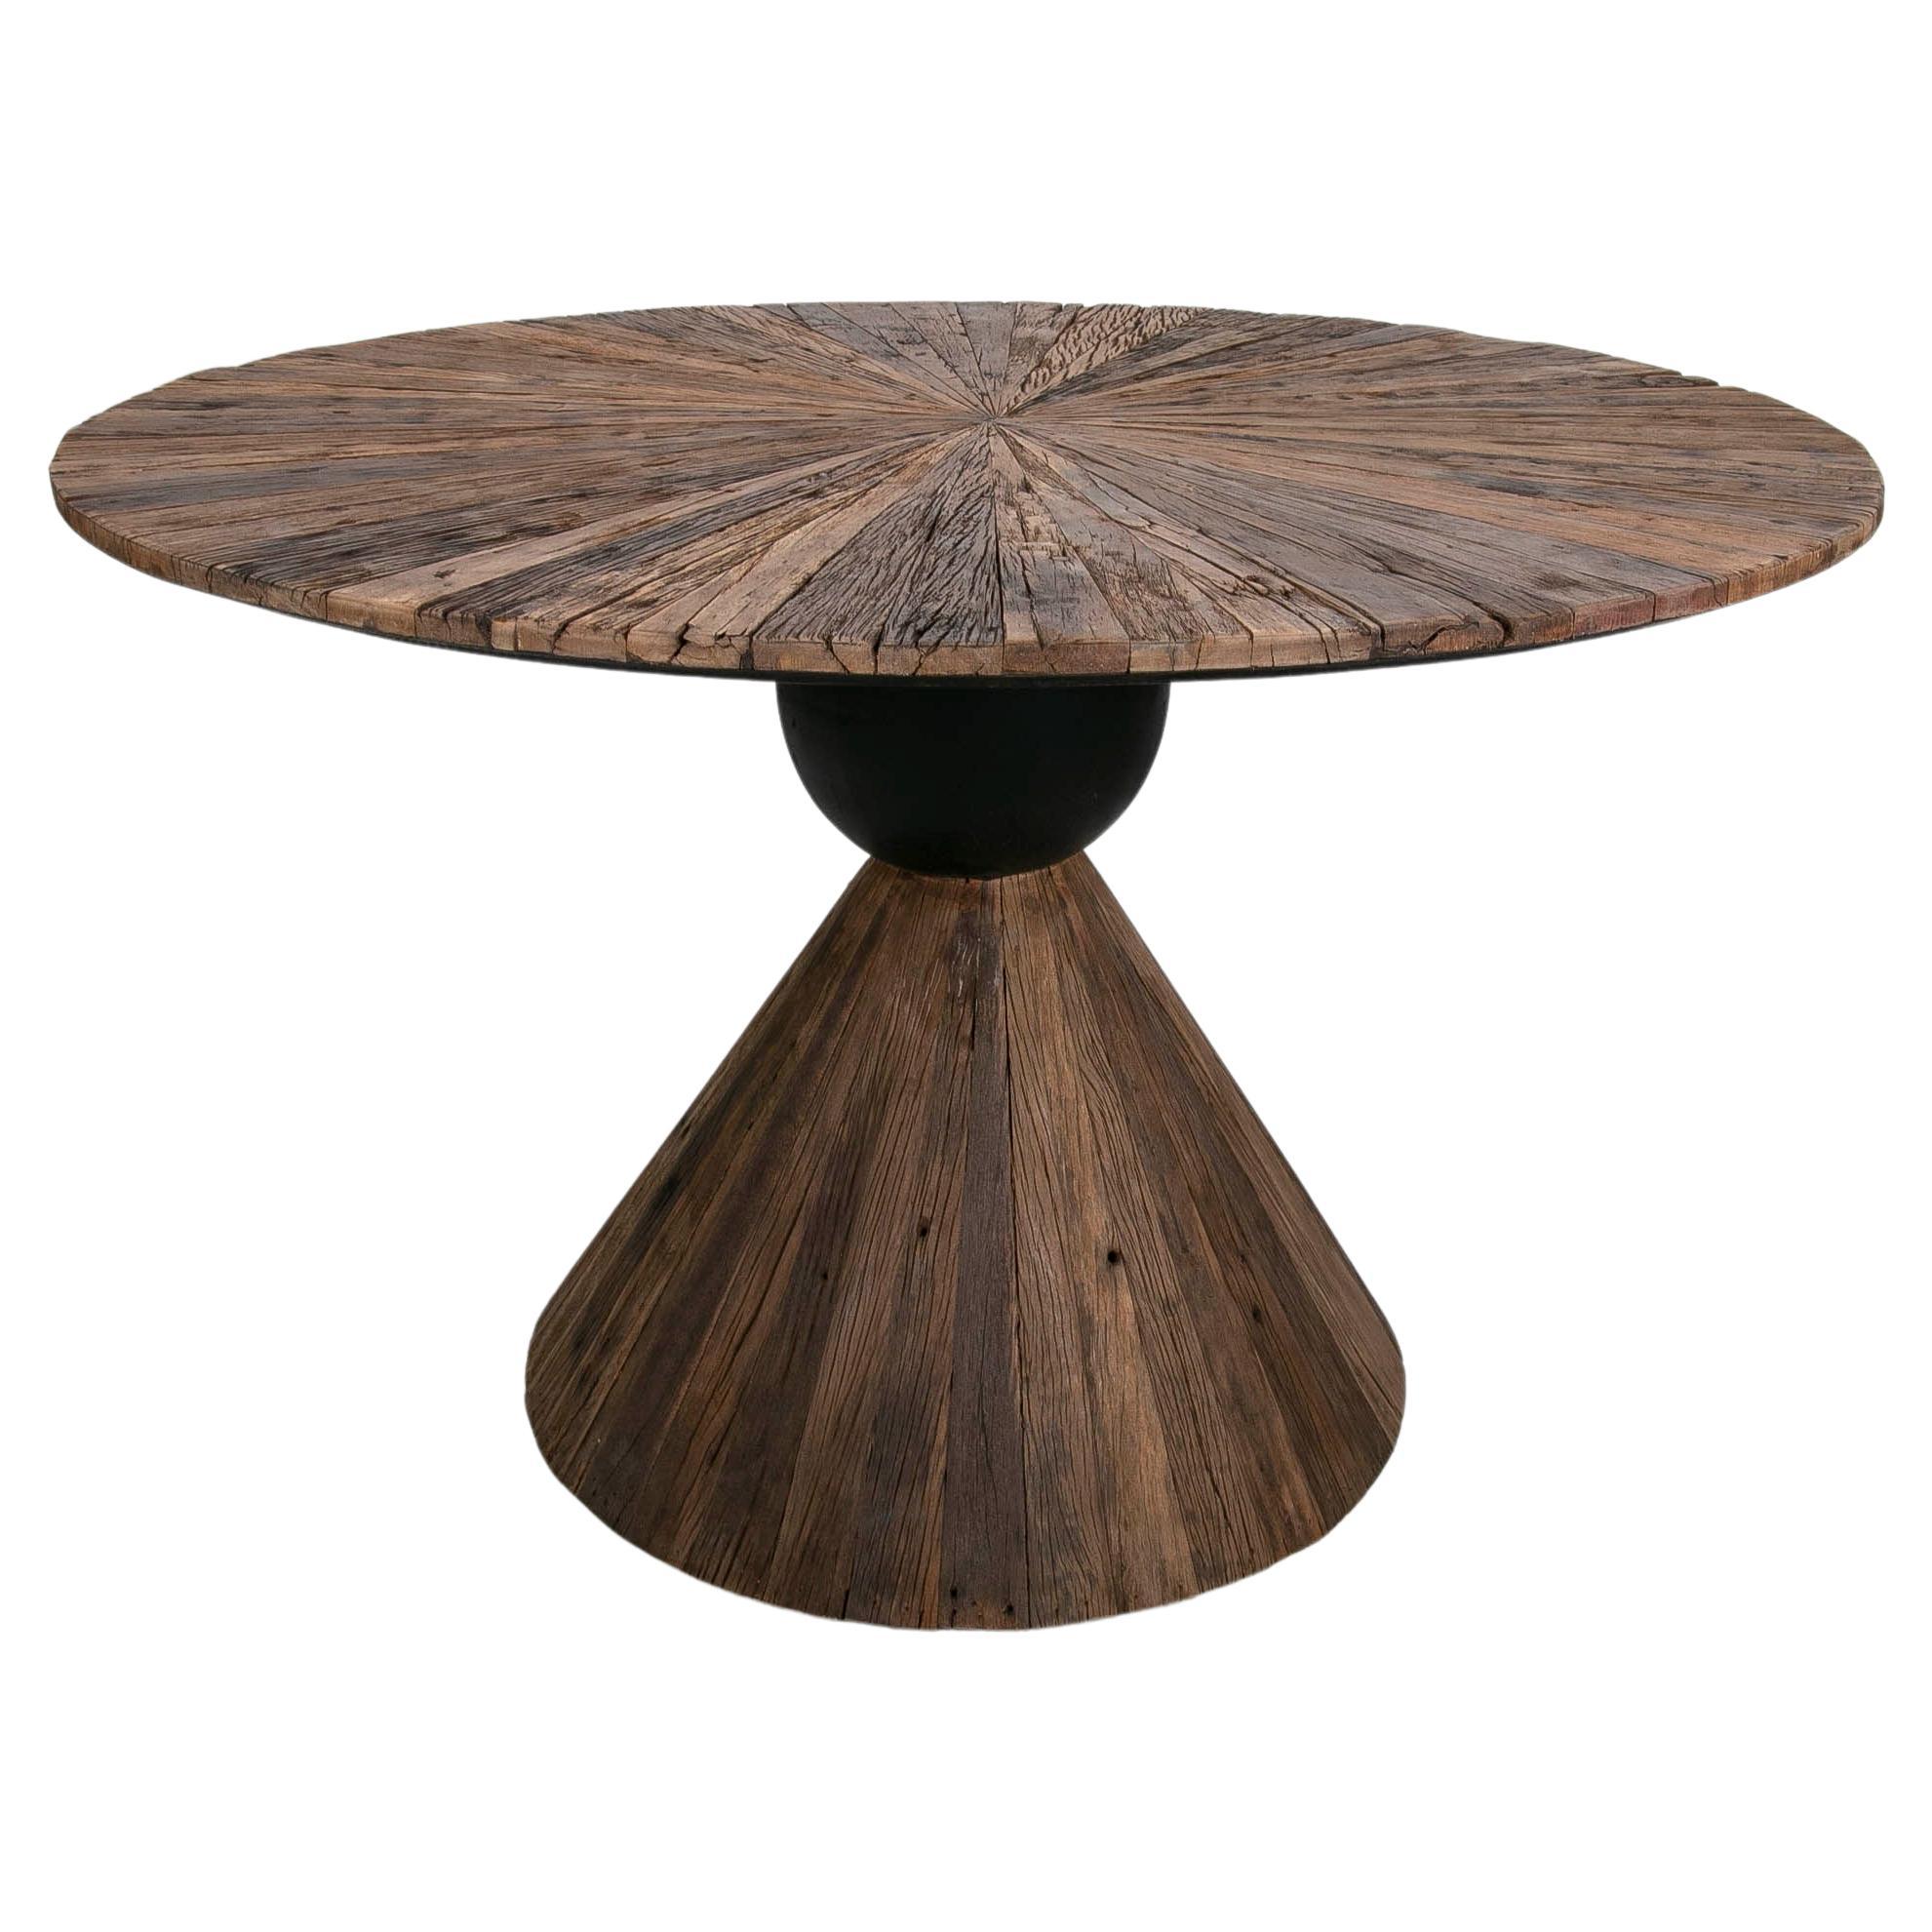 Round Wooden Table with Black Painted Ball Decoration on Foot For Sale